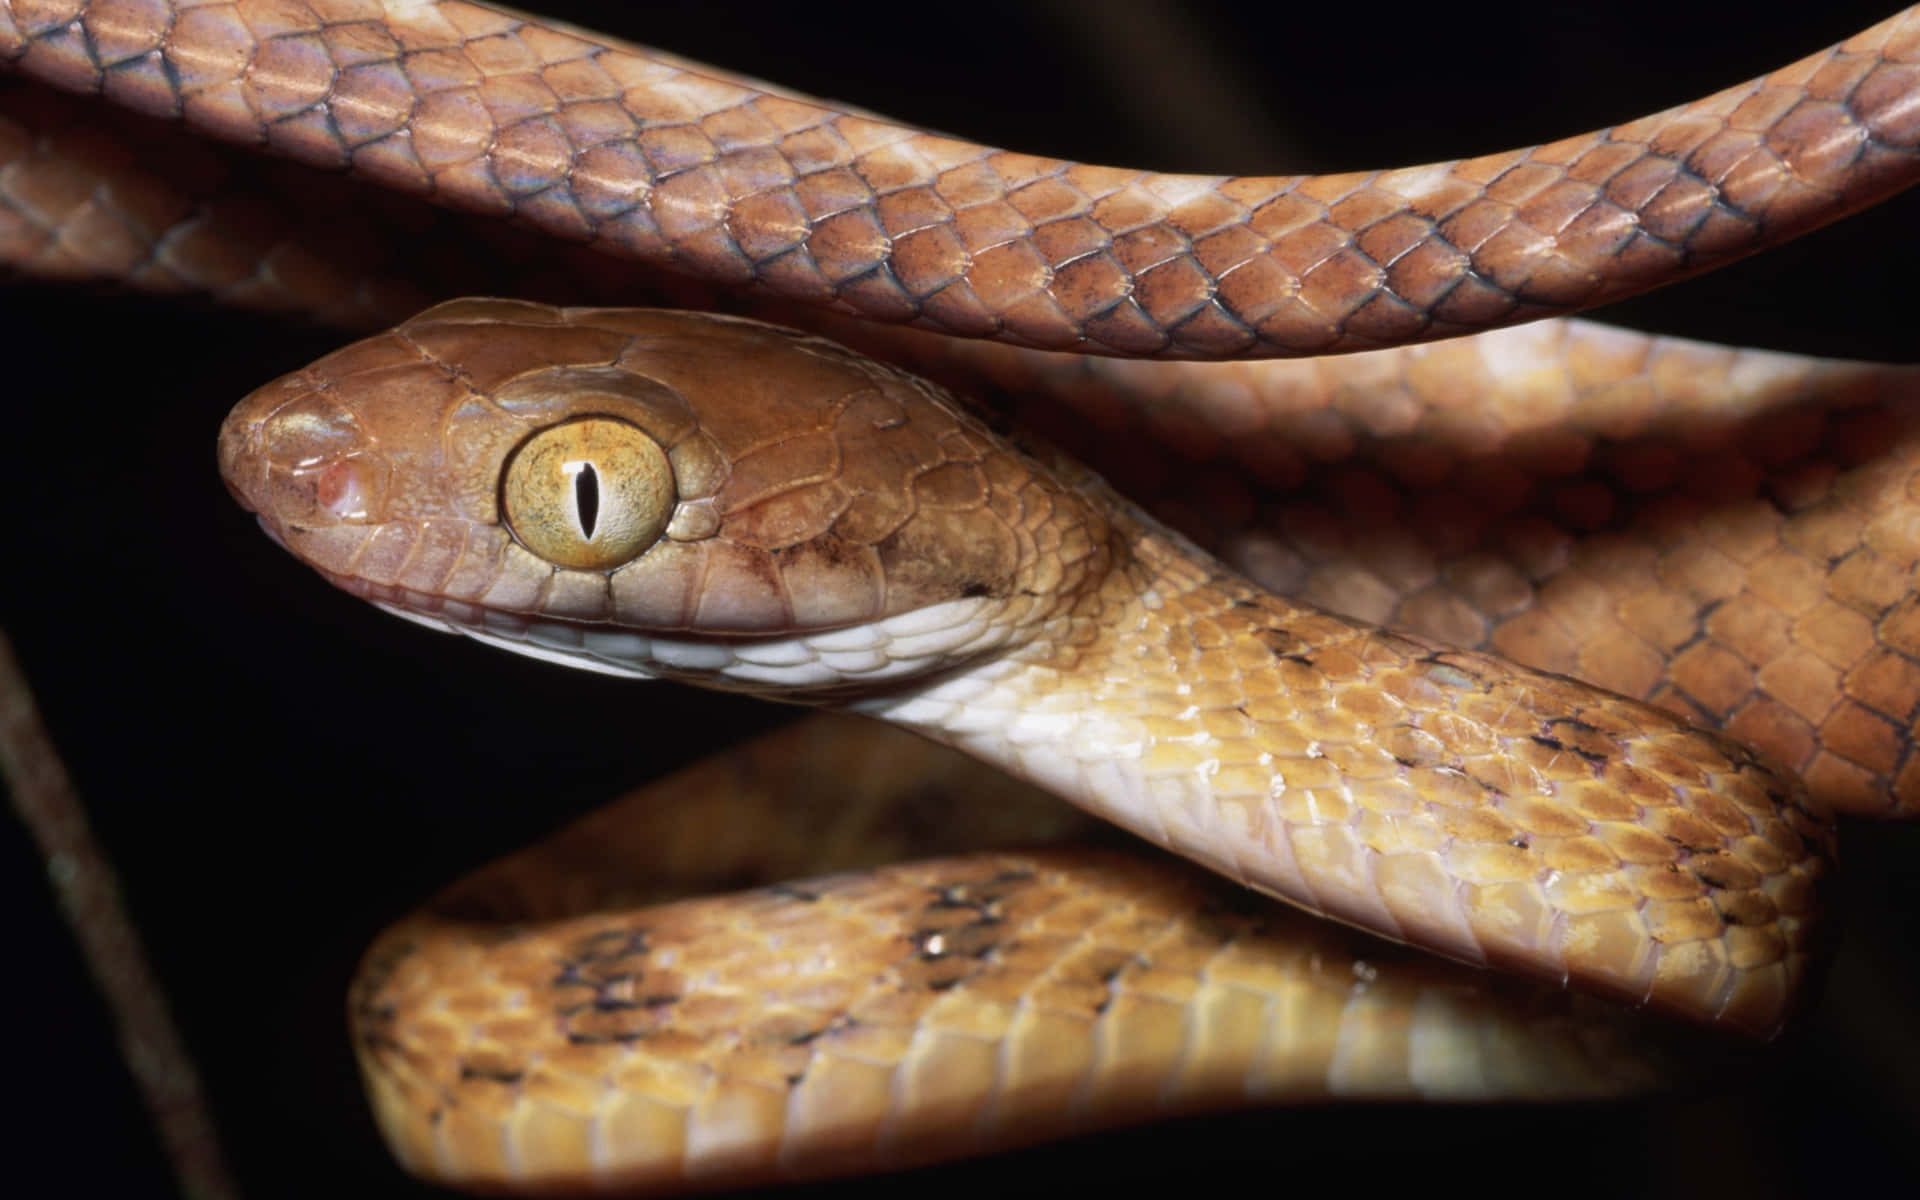 Close-up of a brown snake slithering through grass Wallpaper